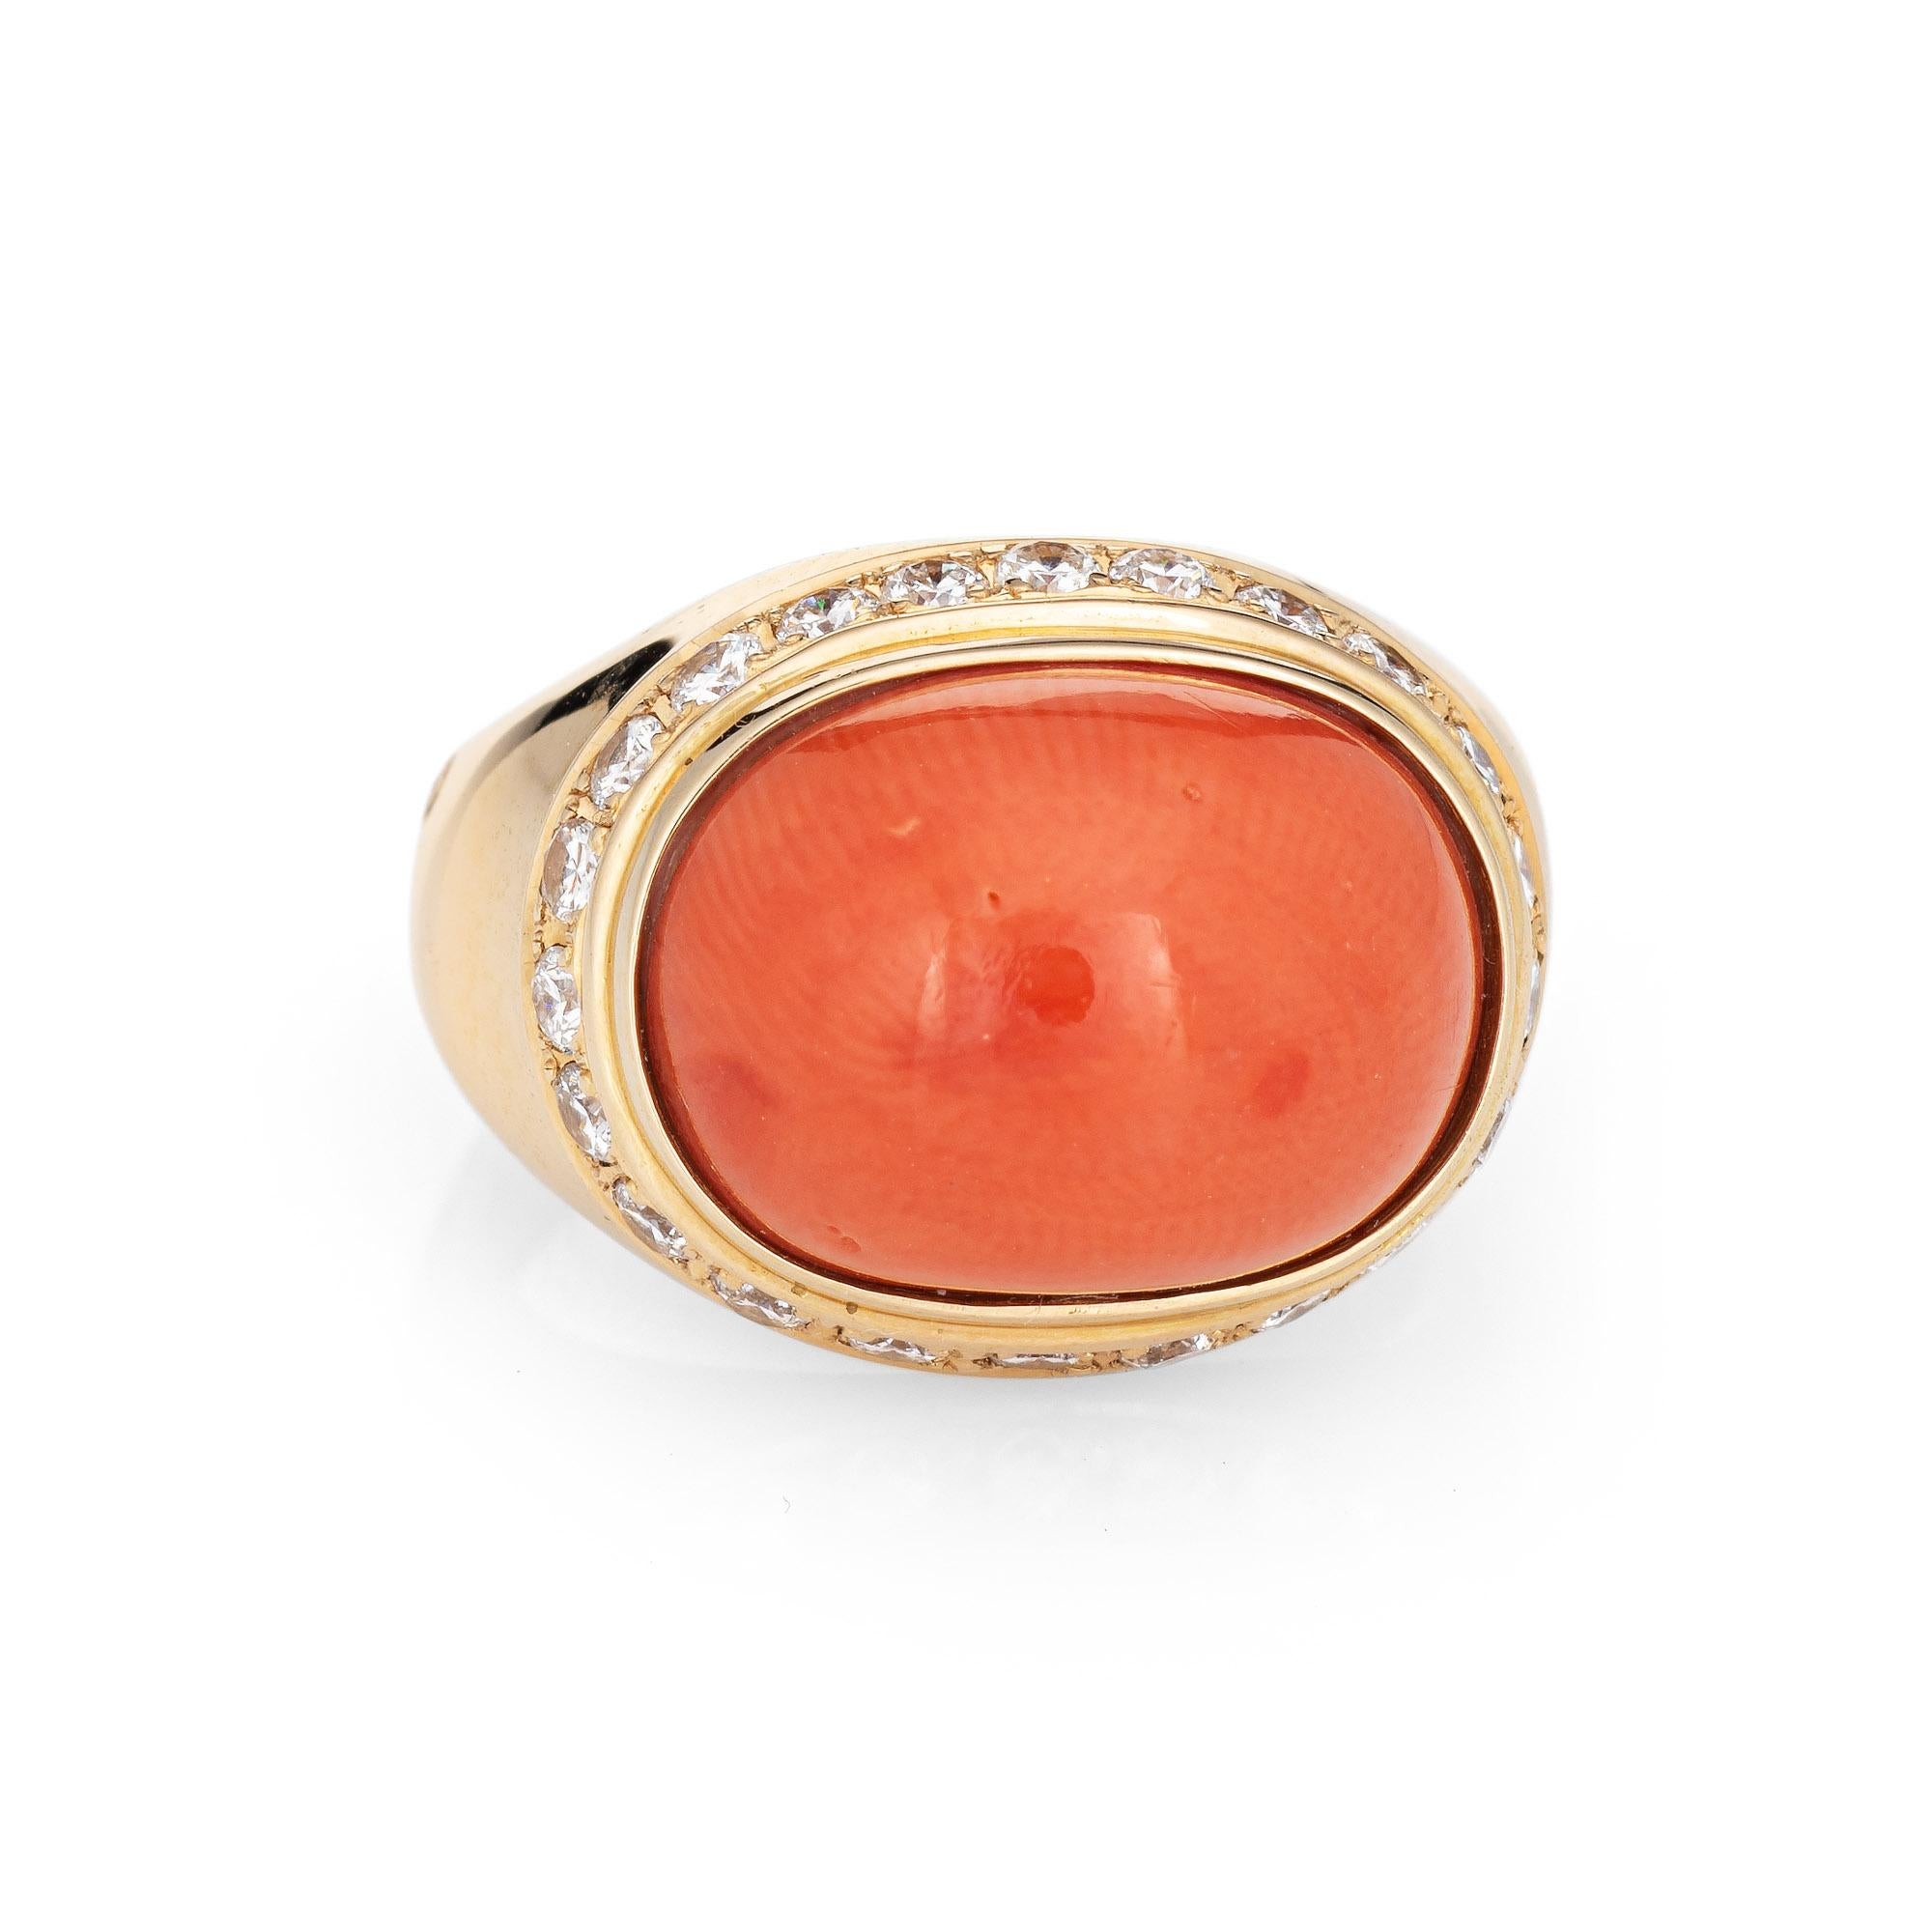 Stylish vintage coral & diamond cocktail ring crafted in 18 karat yellow gold. 

Coral cabochon measures 14mm x 10.5mm (estimated at 7.18 carats) is accented with an estimated 0.55 carats (estimated at G-H color and VS2-SI1 clarity). Note: few